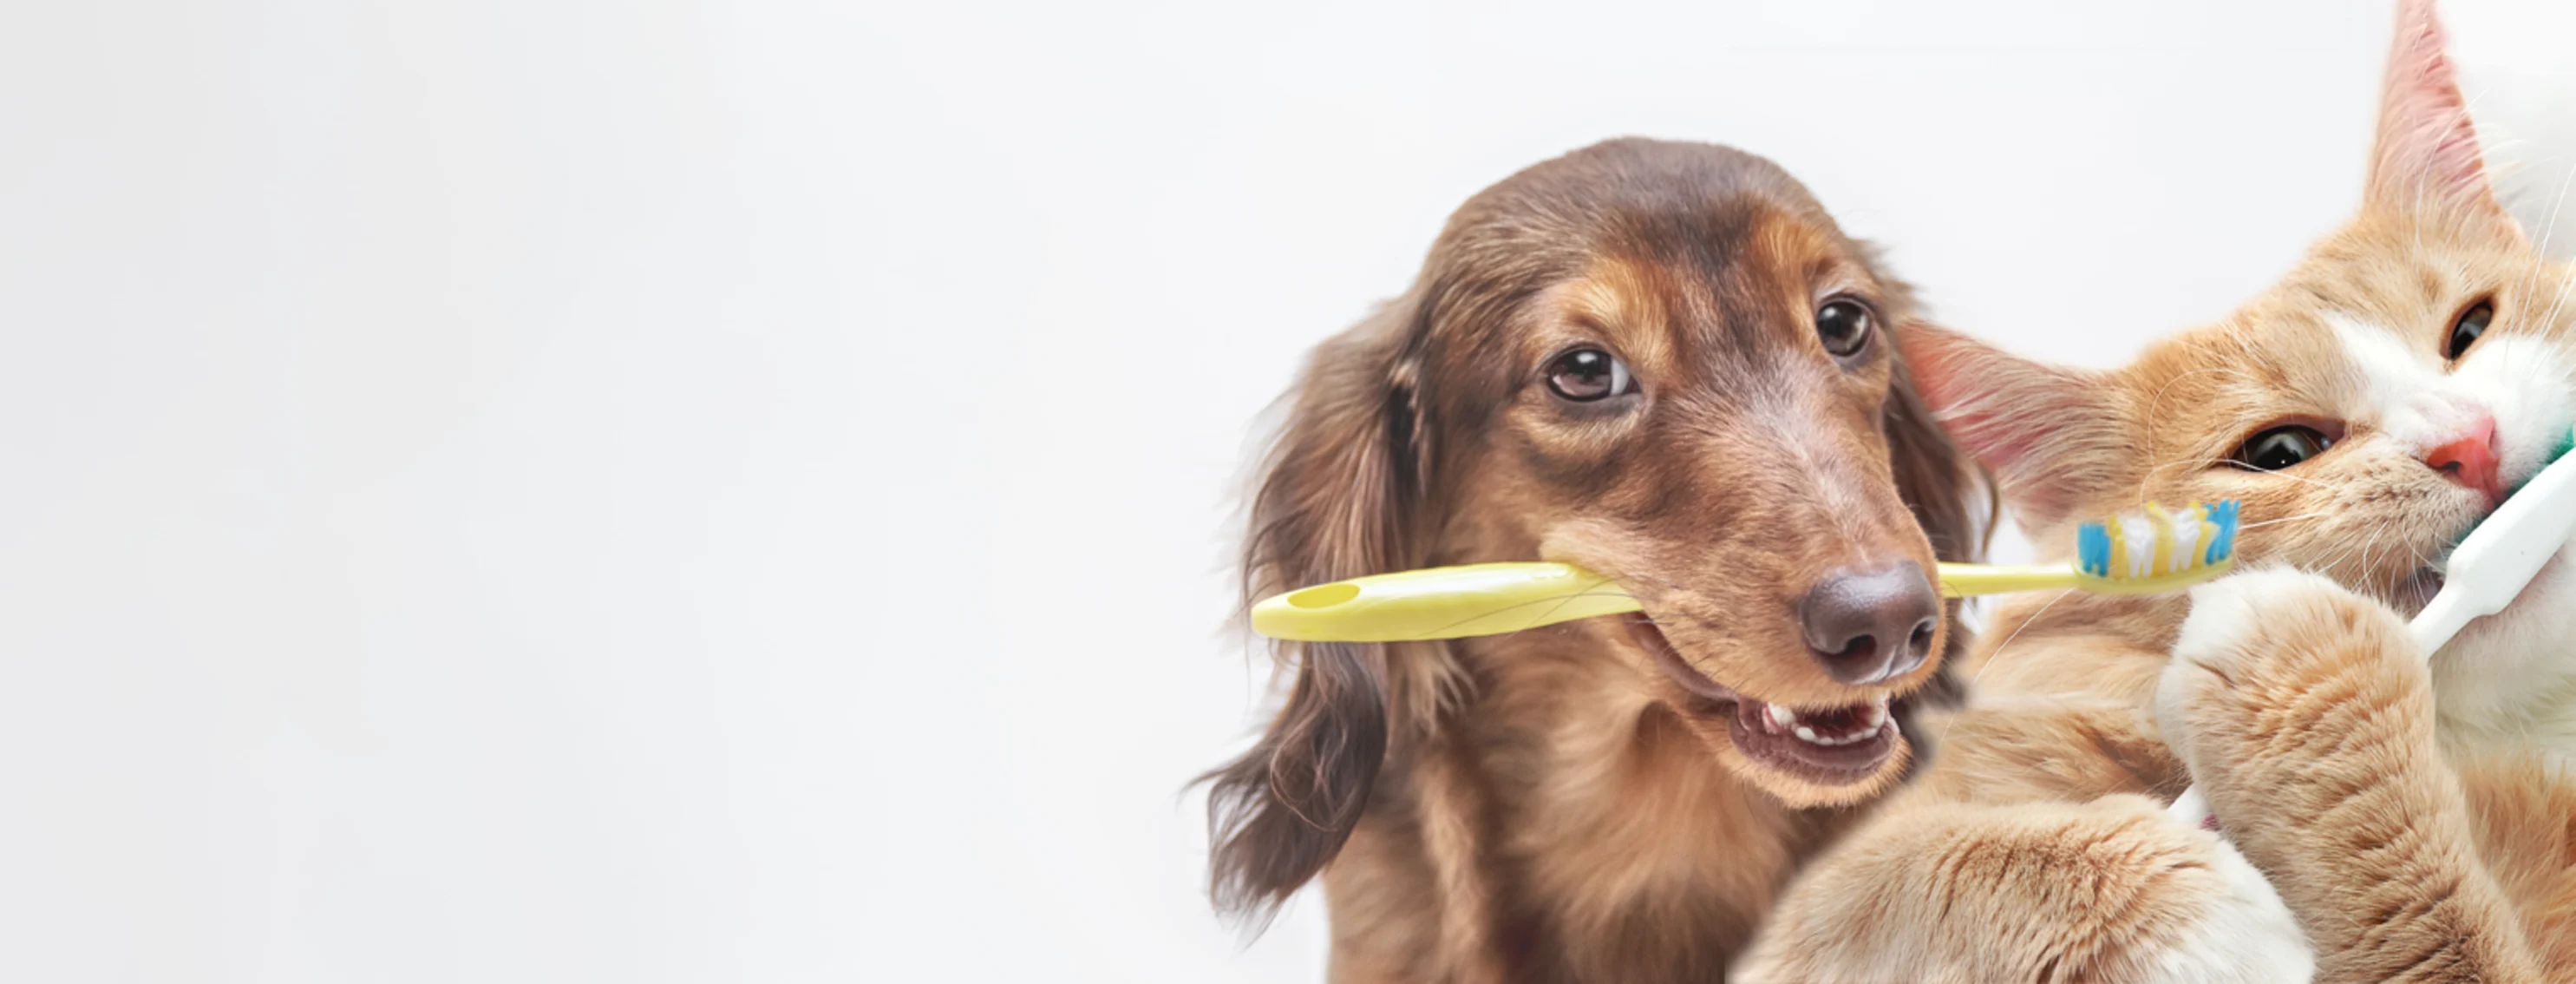 Small dog with yellow toothbrush in mouth